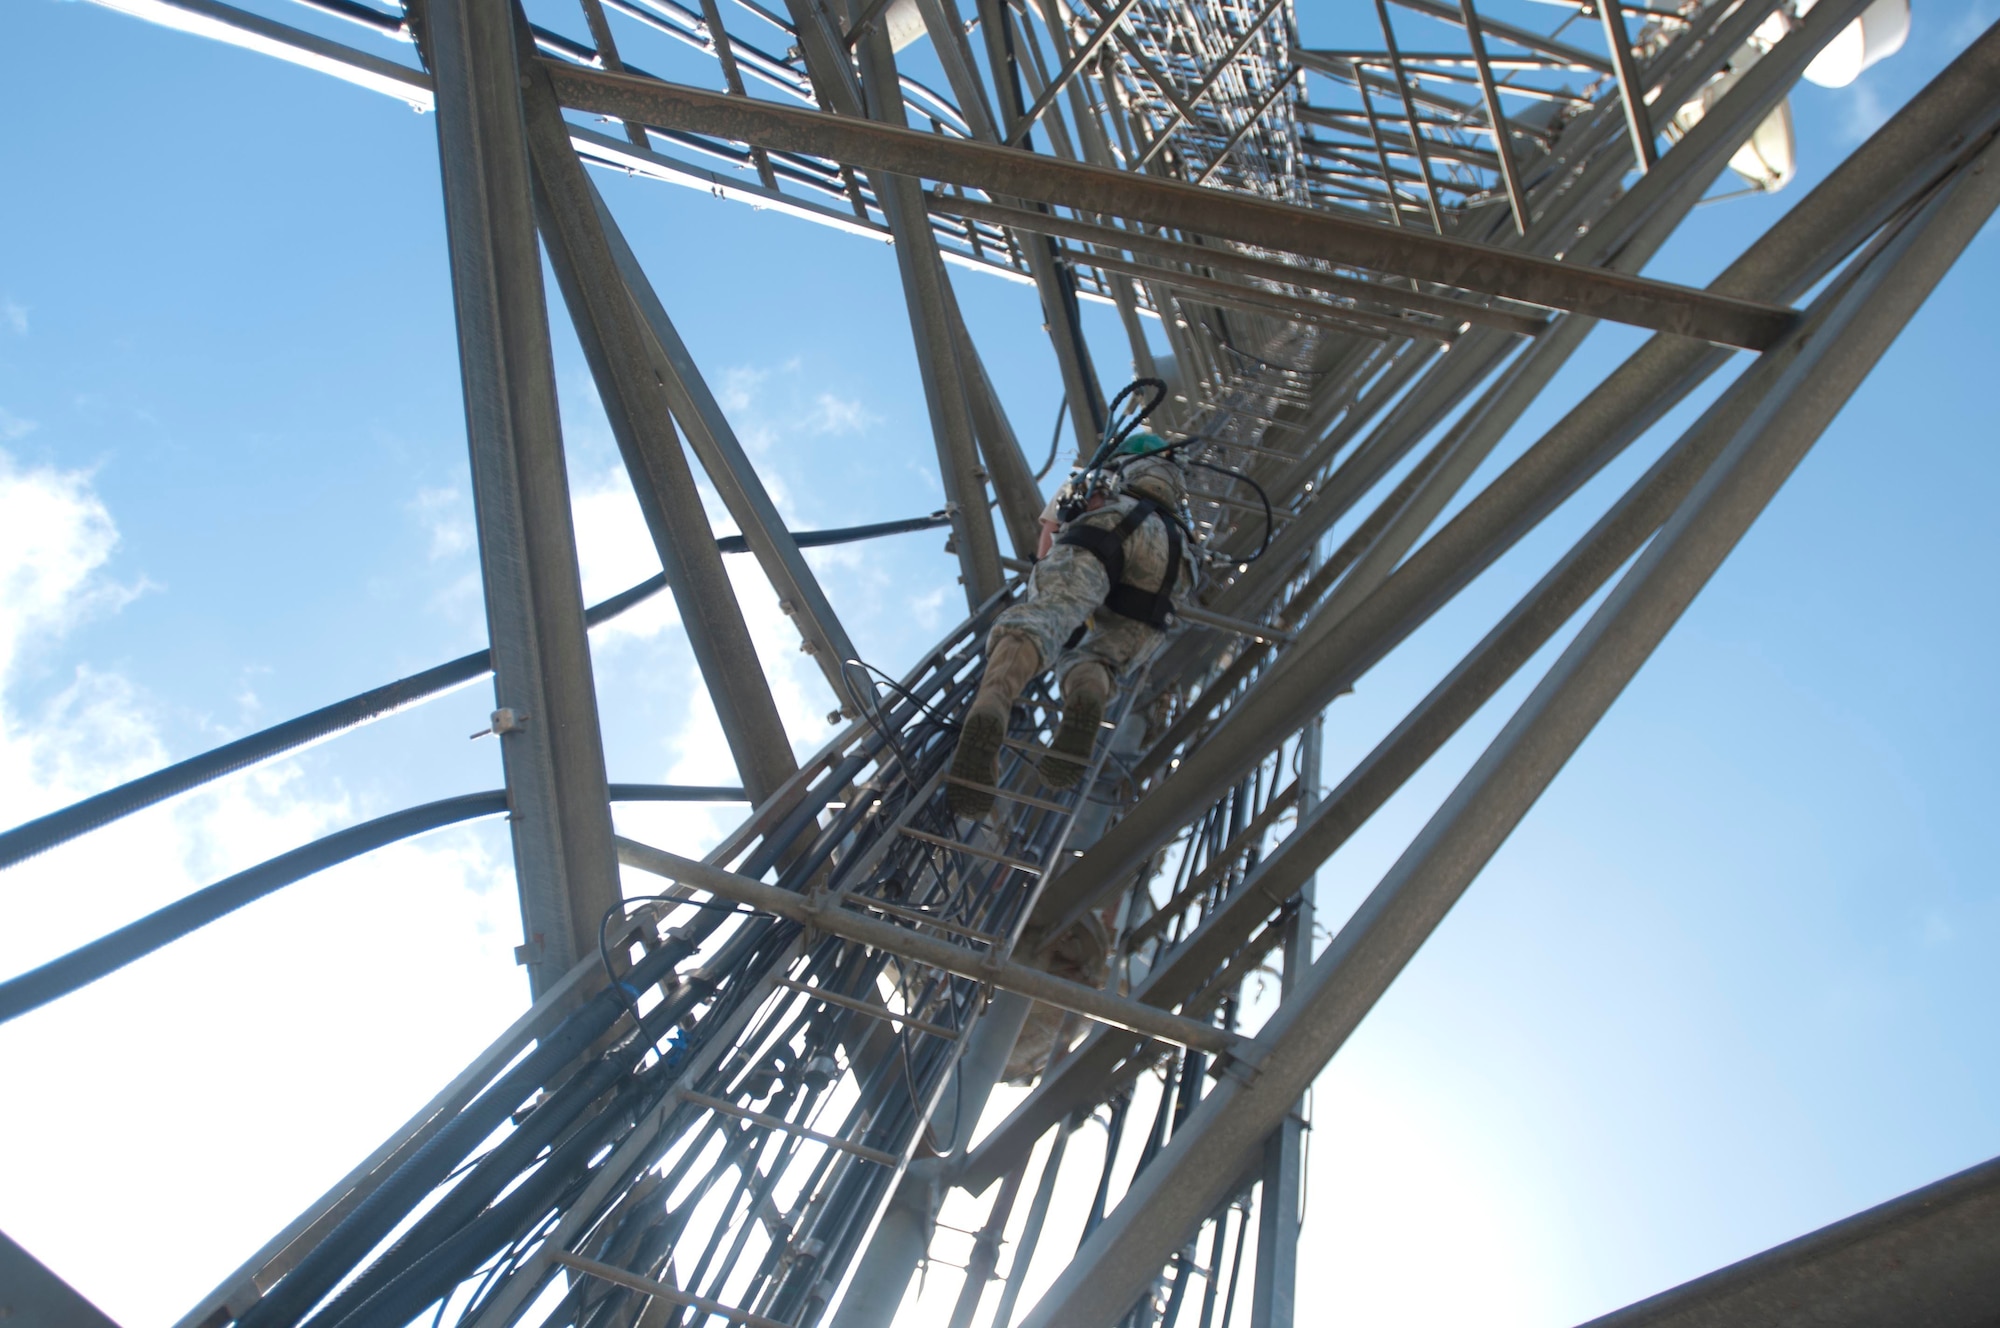 An airman with the 85th Engineering and Installation Squadron, 38th Cyberspace Engineering Installation Group, 688th Cyberspace Wing from Keesler Air Force Base, Mississippi climbs a radio tower October 20, 2017 at Cerro de Punta mountain near Ponce, Puerto Rico. The 85th EIS are working to reestablish and improve radio communications for local emergency personnel and first responders across the island.